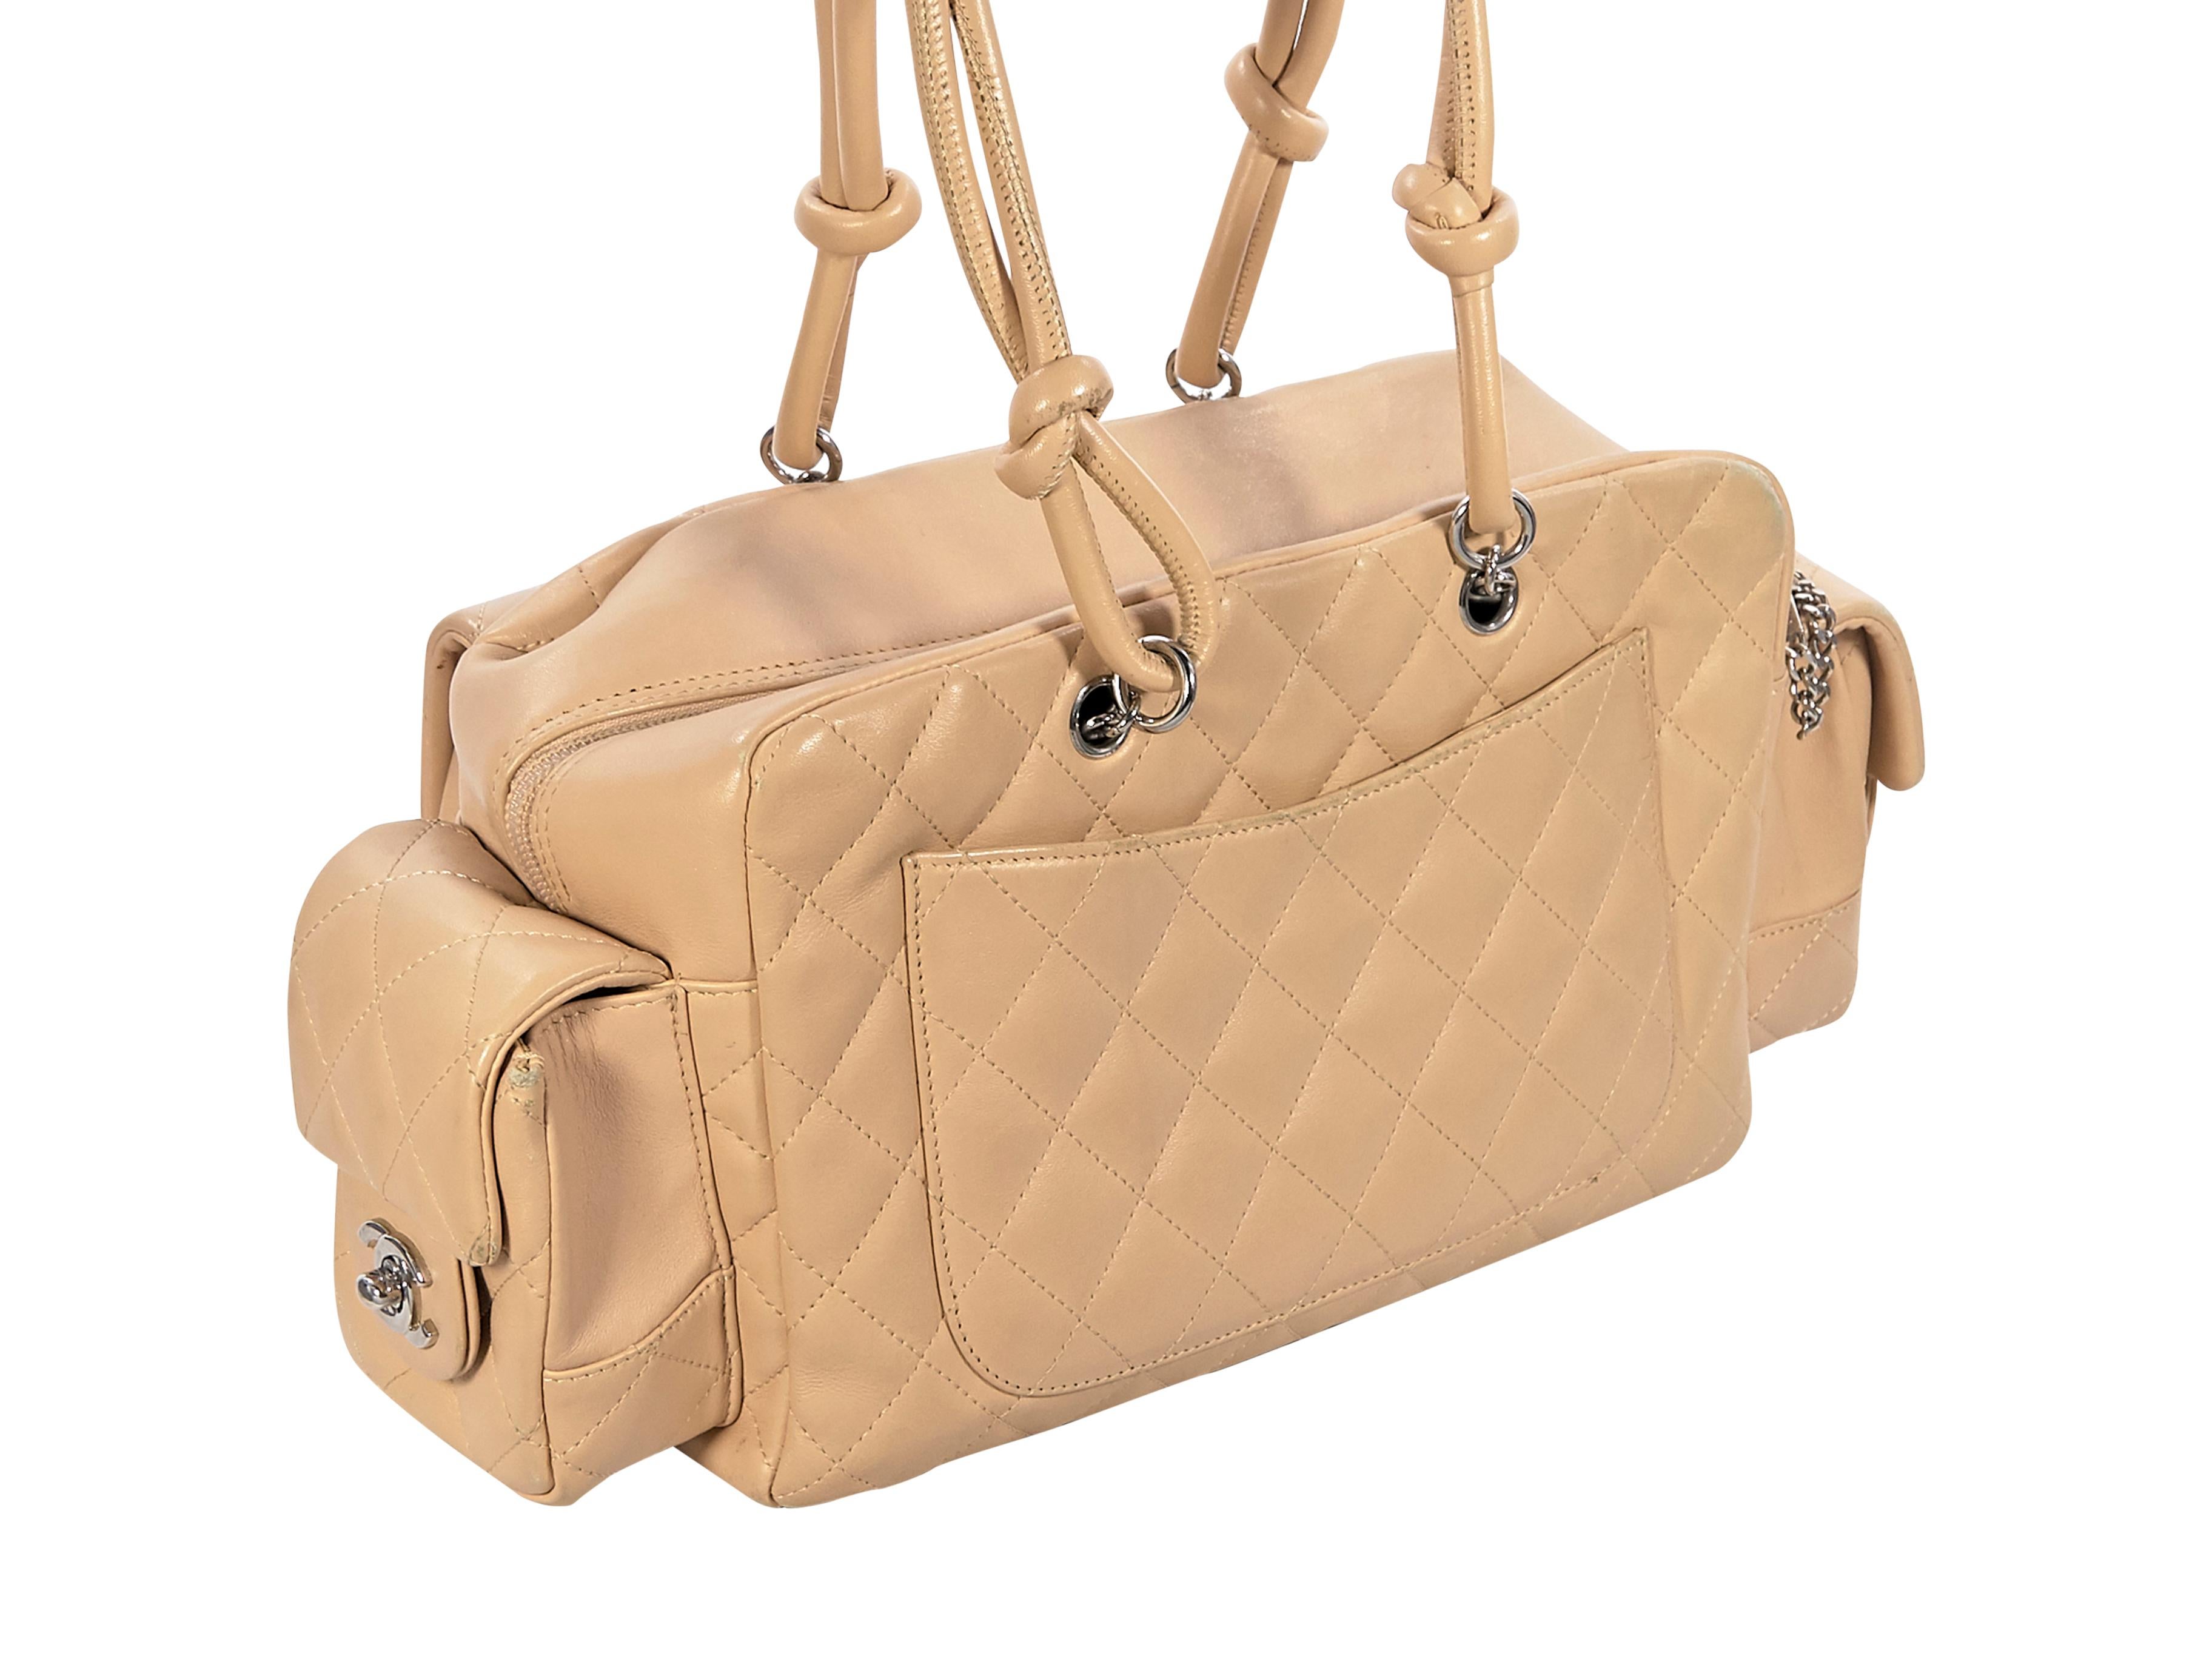 Product details:  Nude quilted leather Ligne Cambon Reporter shoulder bag by Chanel.  Dual shoulder straps.  Top zip closure.  Lined interior with inner zip pocket.  Exterior front and side twist-lock flap pockets.  Back exterior slide pocket. 